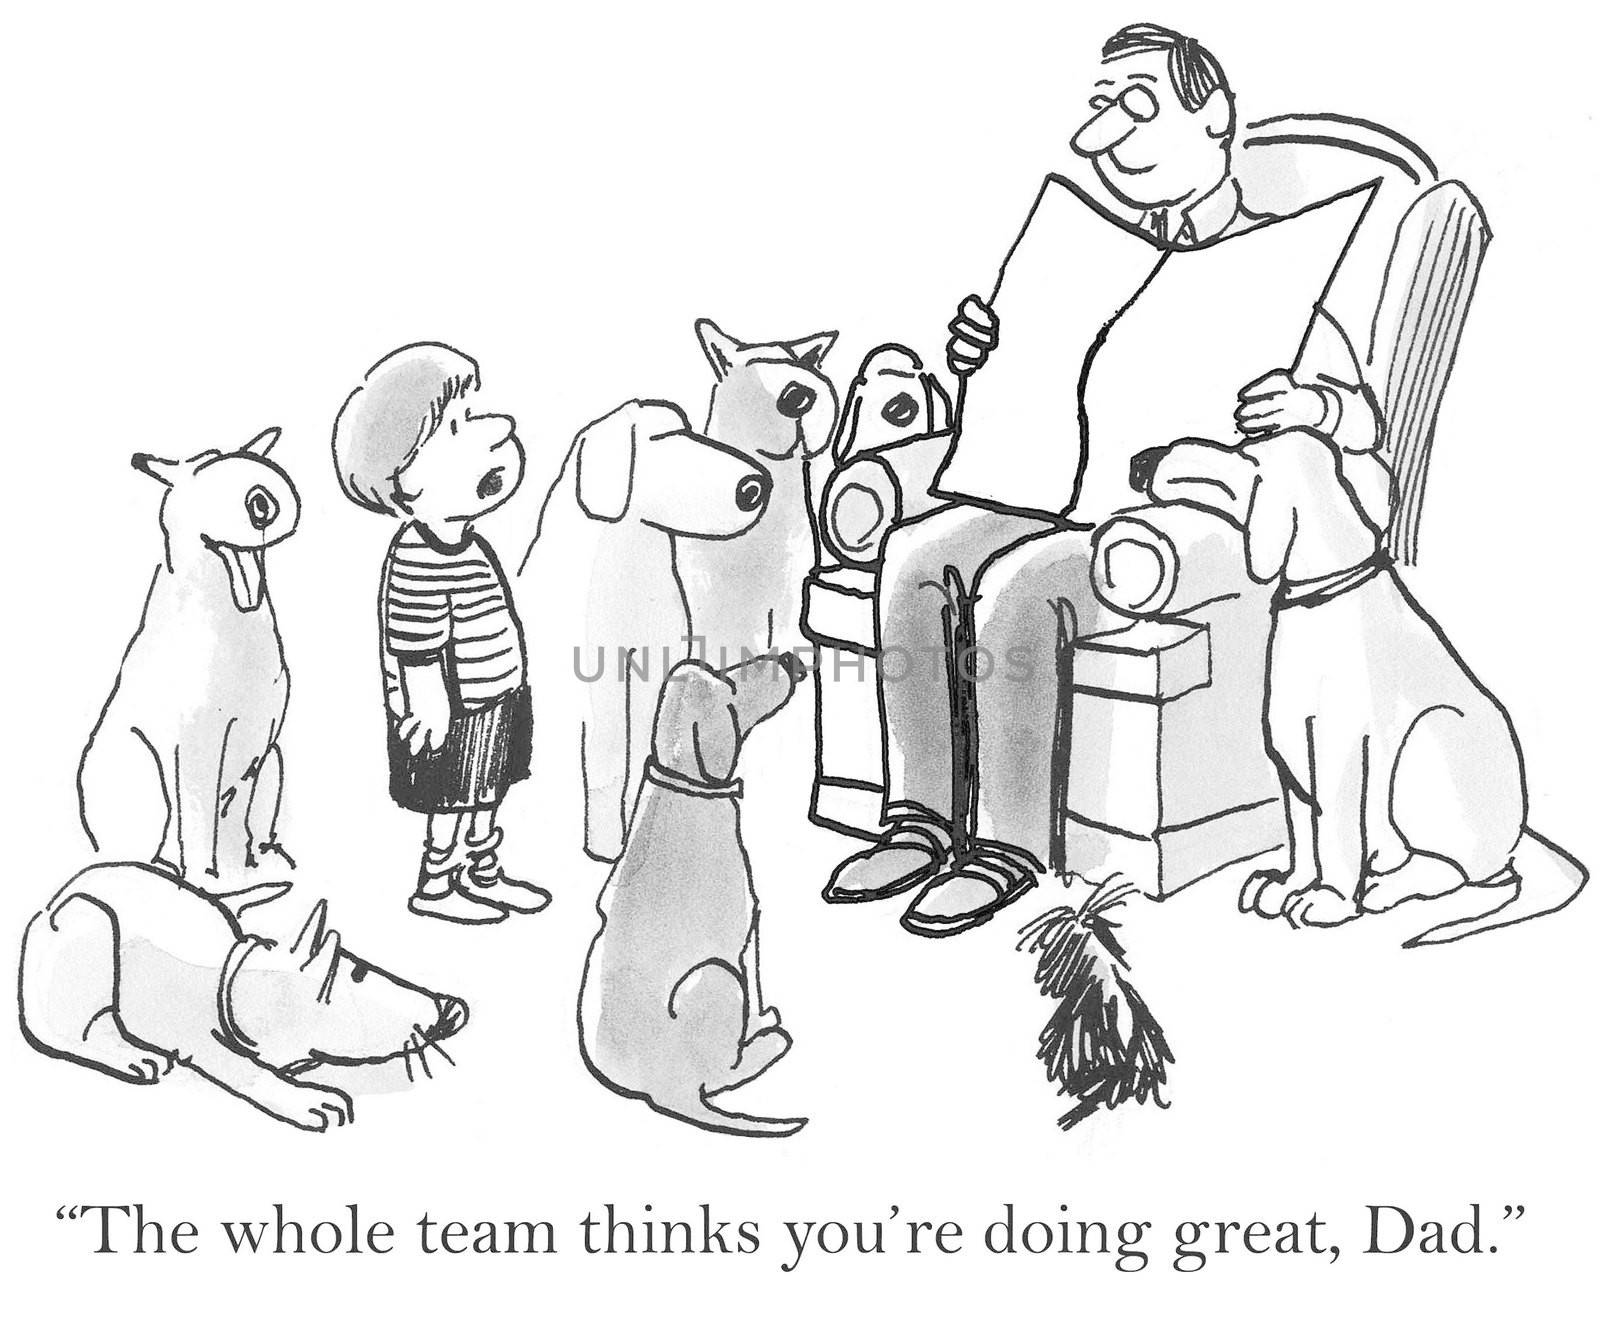 "The whole team thinks you're doing great, Dad."